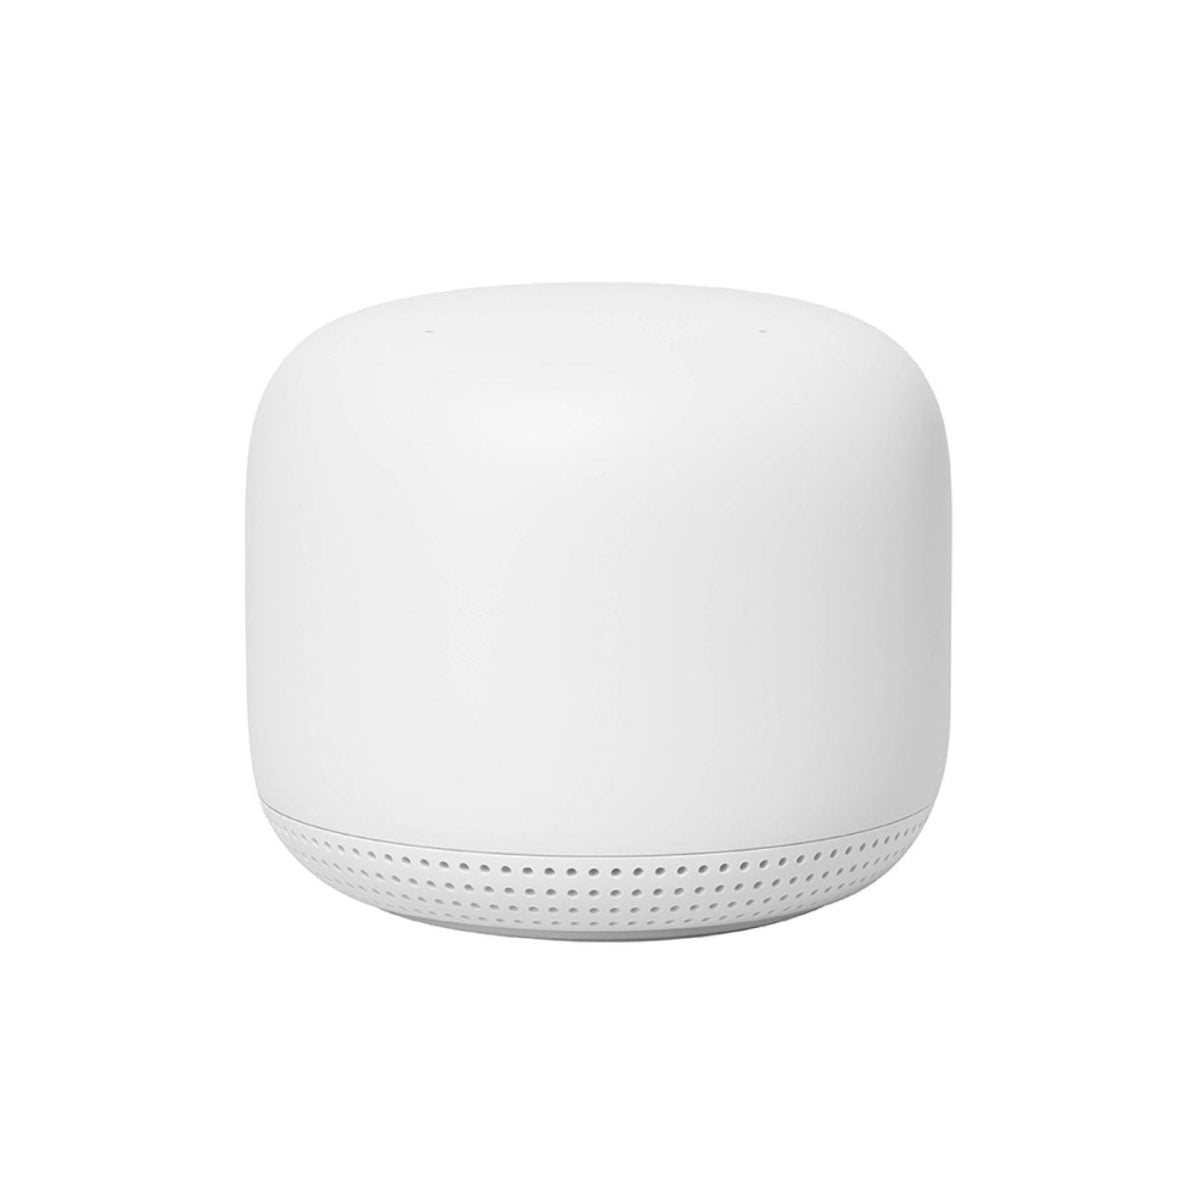 Dsd2212 05 Scaled Google Https://Youtu.be/Wsduj9Sm78K Google Google Nest Wifi Router And 2 Access Points (2020)